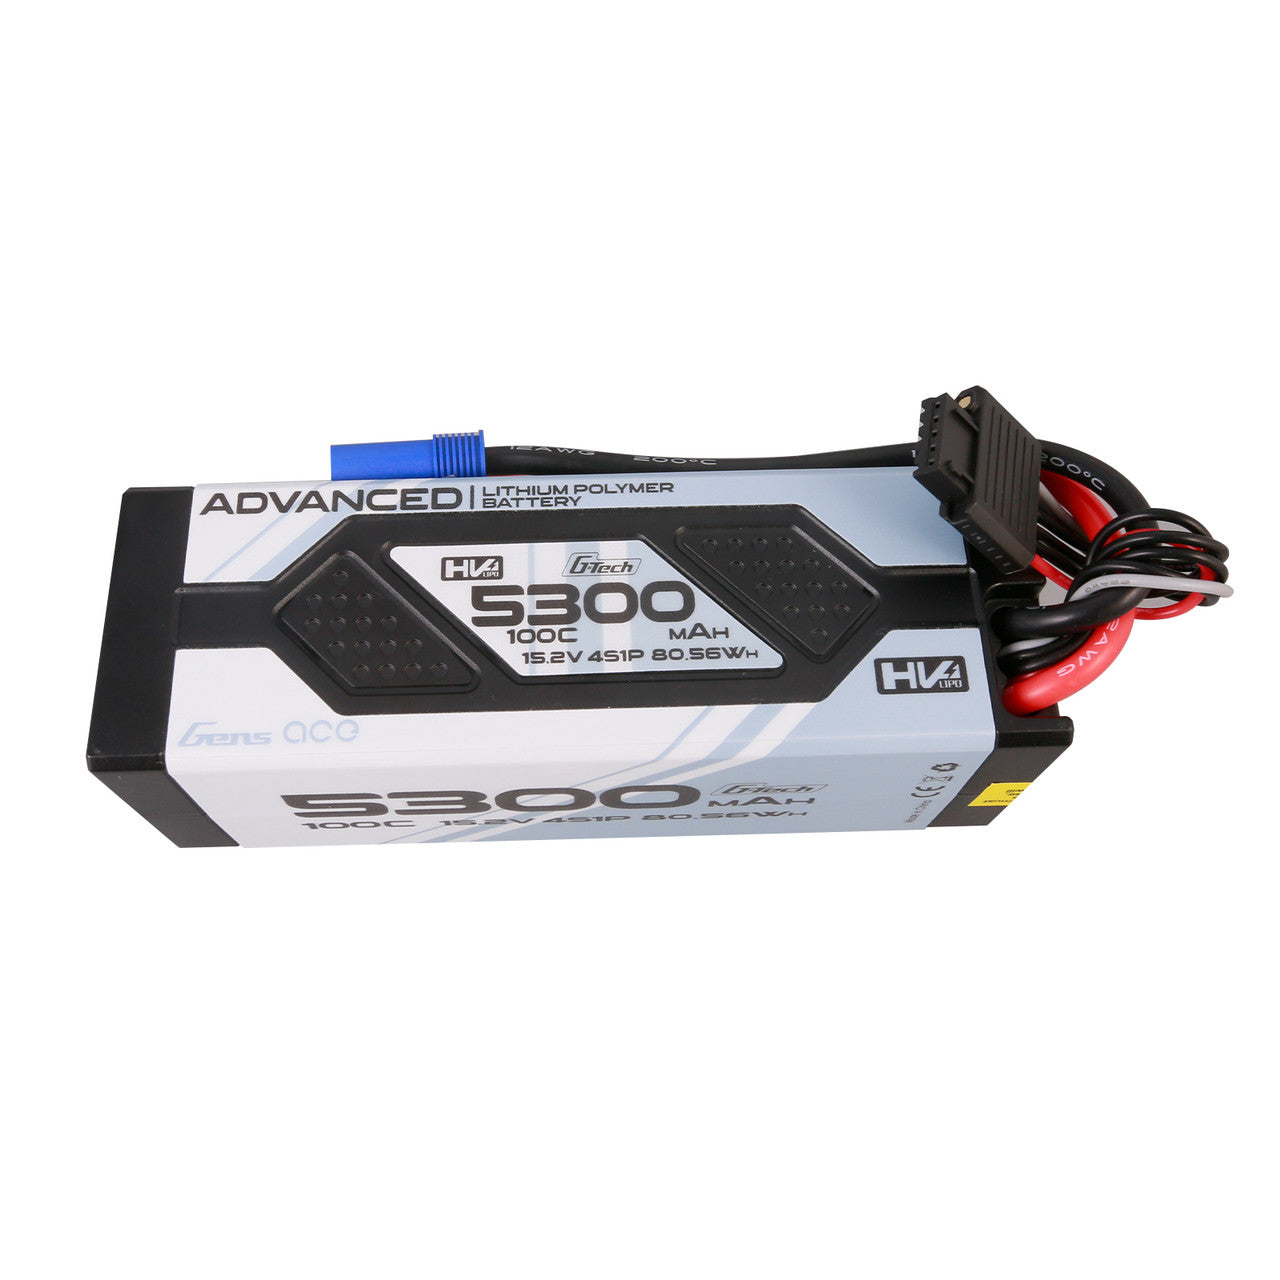 Gens Ace 5300mAh 4S 15.2V 100C High Voltage G-Tech Lipo Battery Pack With EC5 Plug